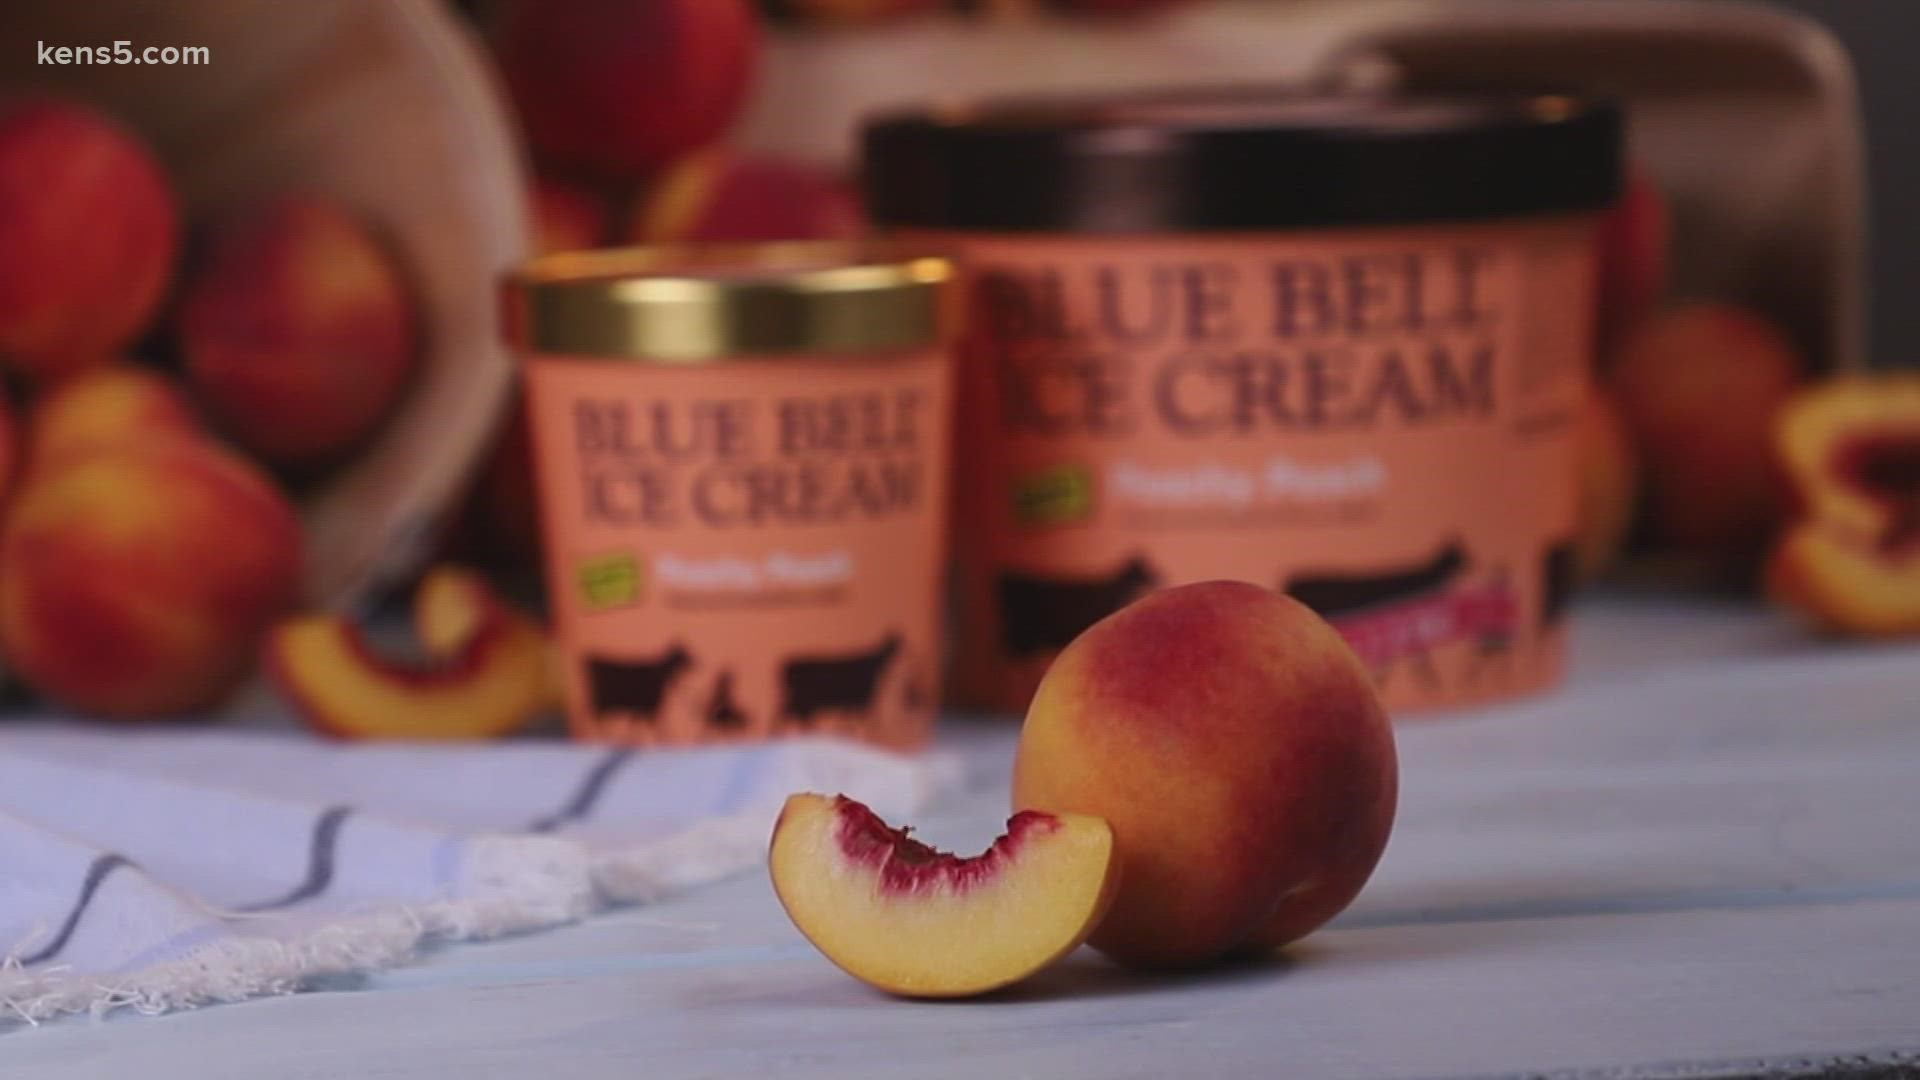 “Avid Blue Bell fans may recognize Peachy Peach from their local ice cream parlor." Now it's available in the half-gallon and pint sizes for a limited time.